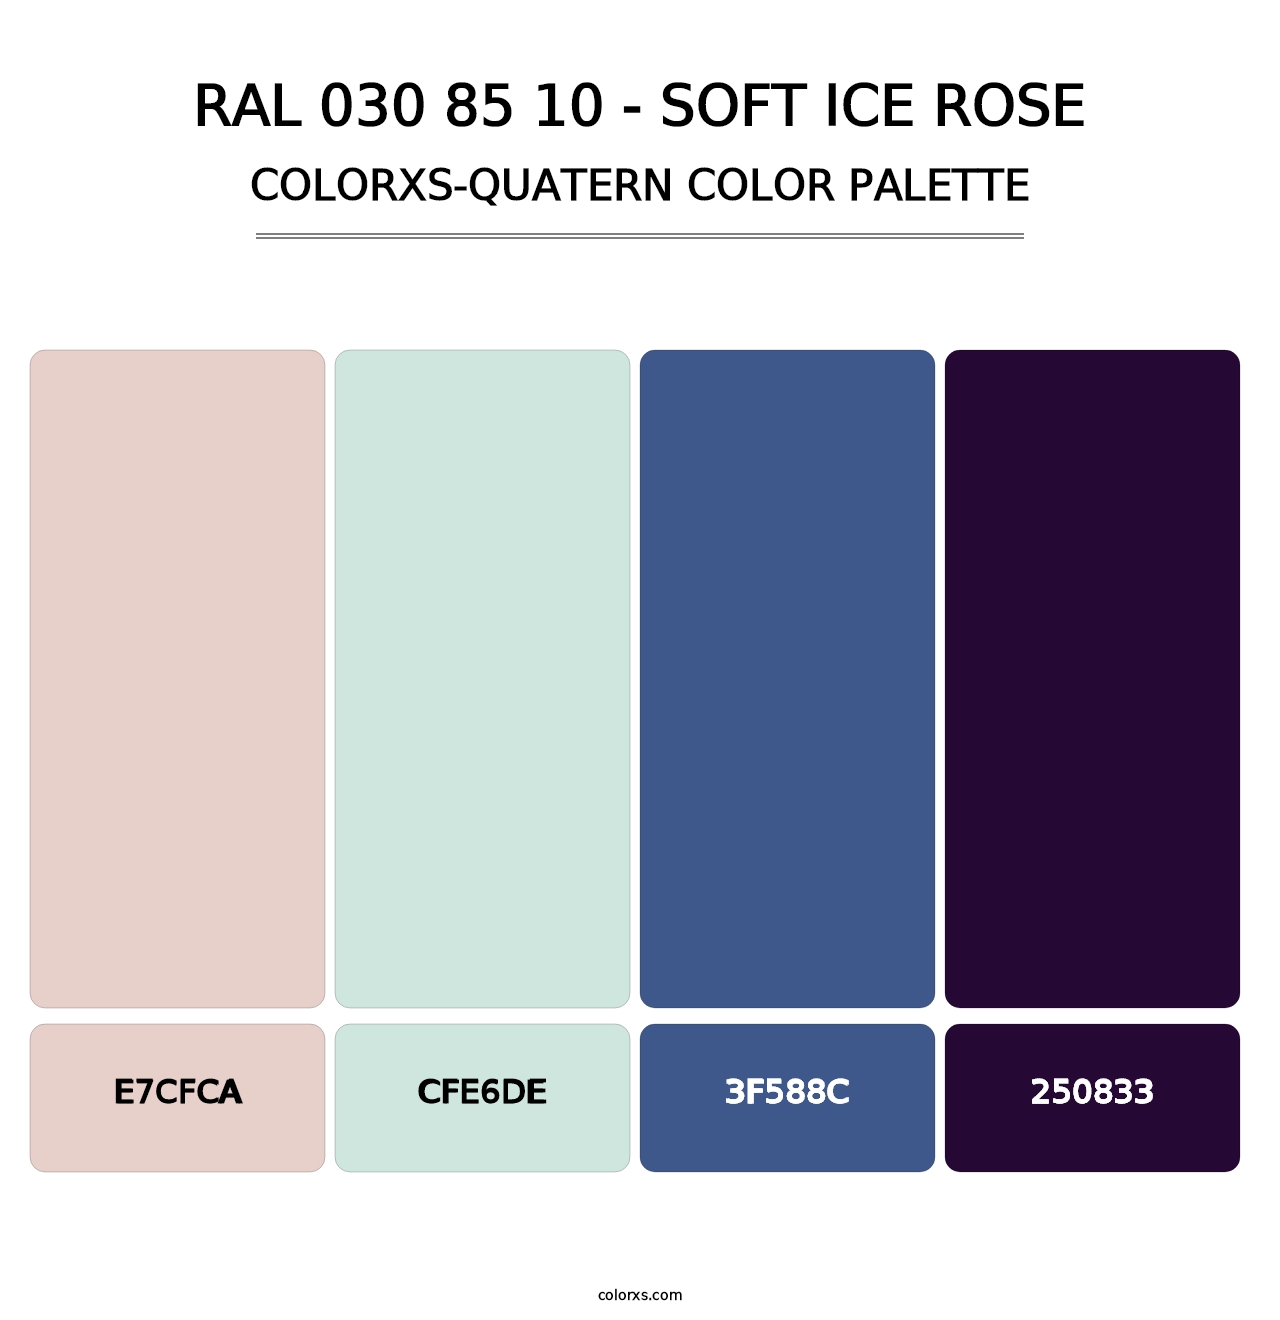 RAL 030 85 10 - Soft Ice Rose - Colorxs Quatern Palette